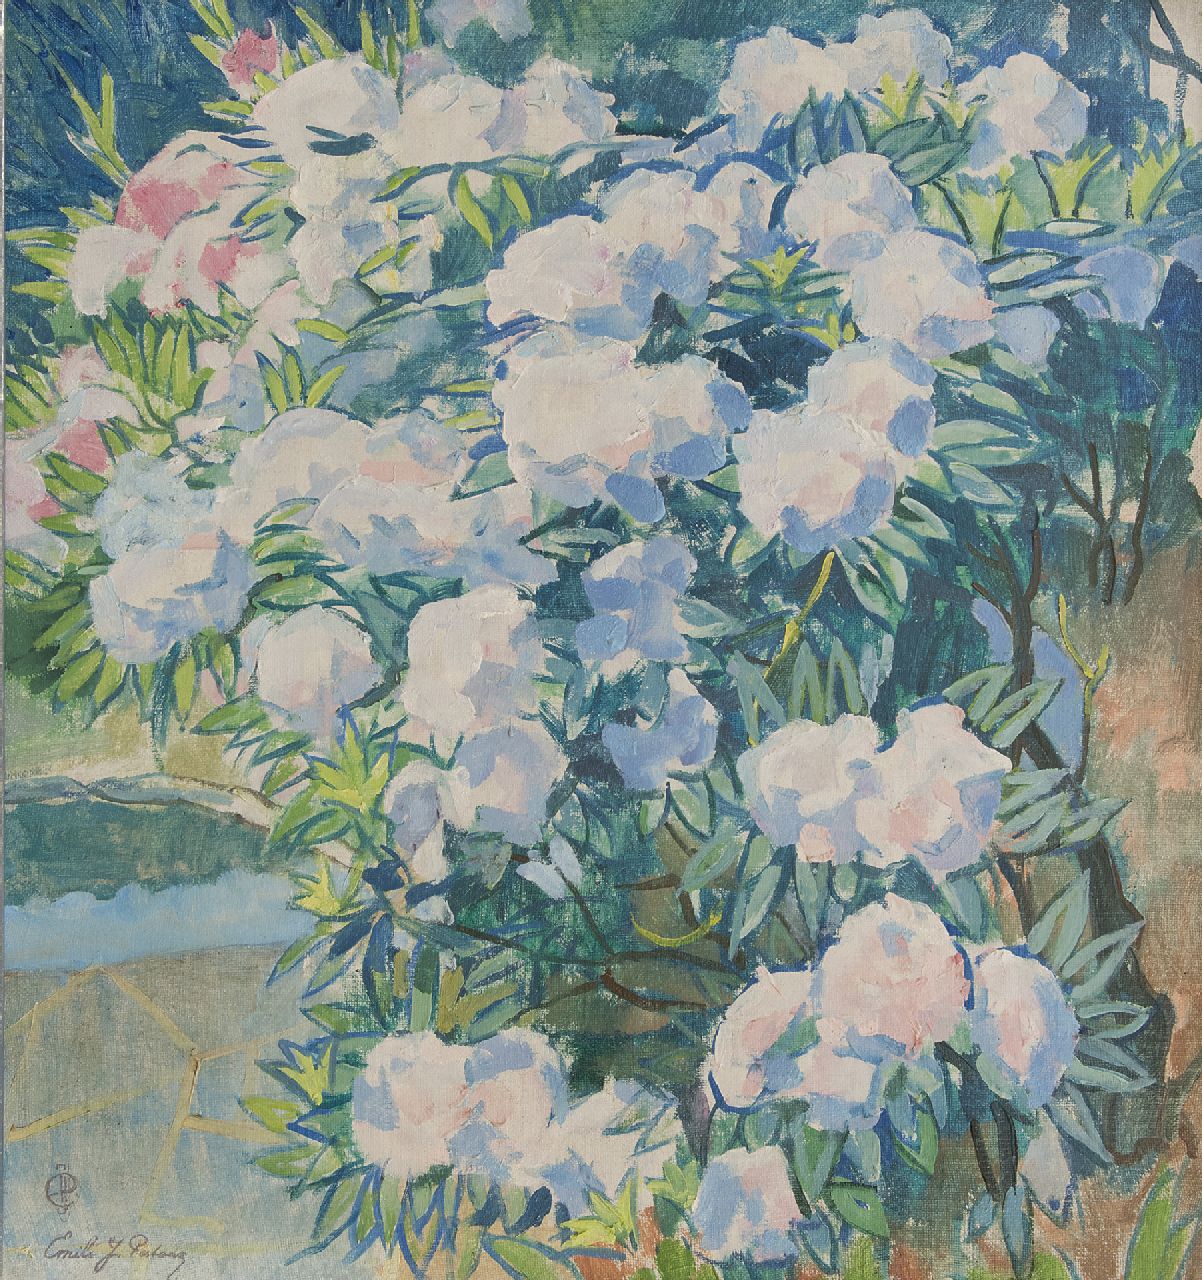 Patoux E.J.  | Emile Joseph Patoux | Paintings offered for sale | White Azalea japonica, oil on canvas 75.8 x 70.5 cm, signed l.l. with monogram and in full